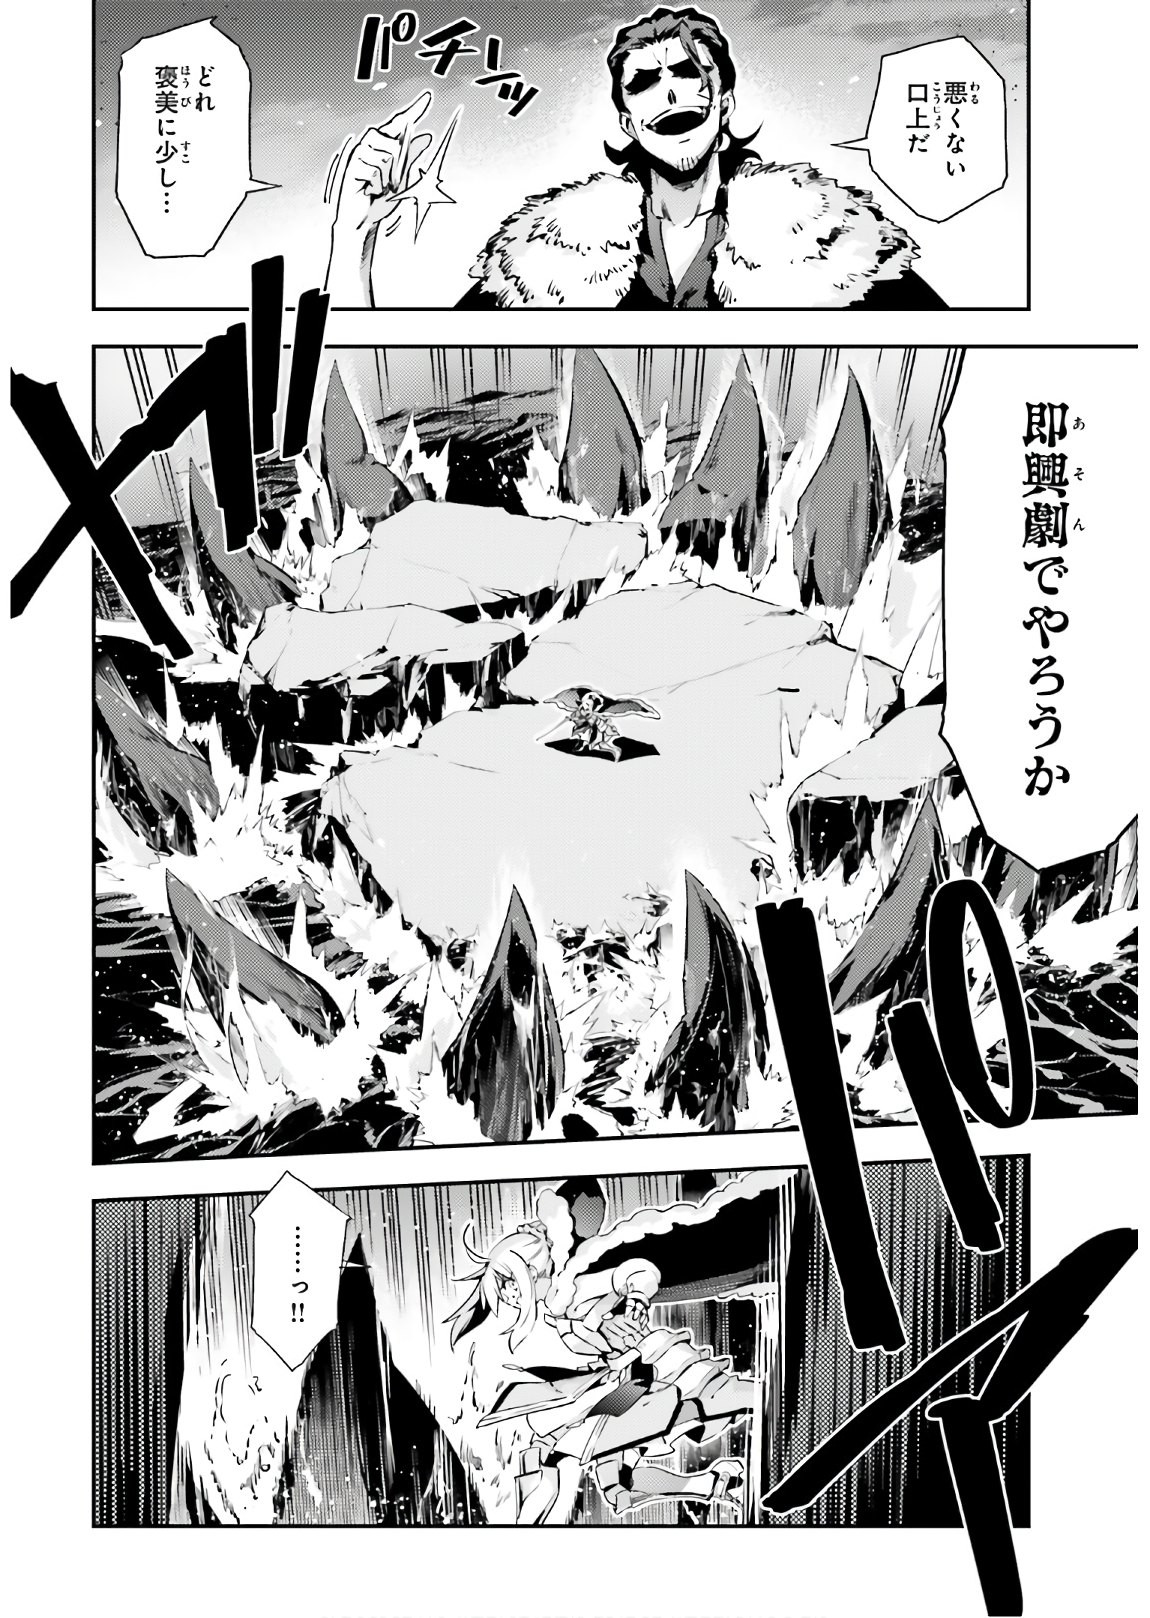 Fate/Kaleid Liner Prisma Illya Drei! - Chapter 58-2 - Page 2